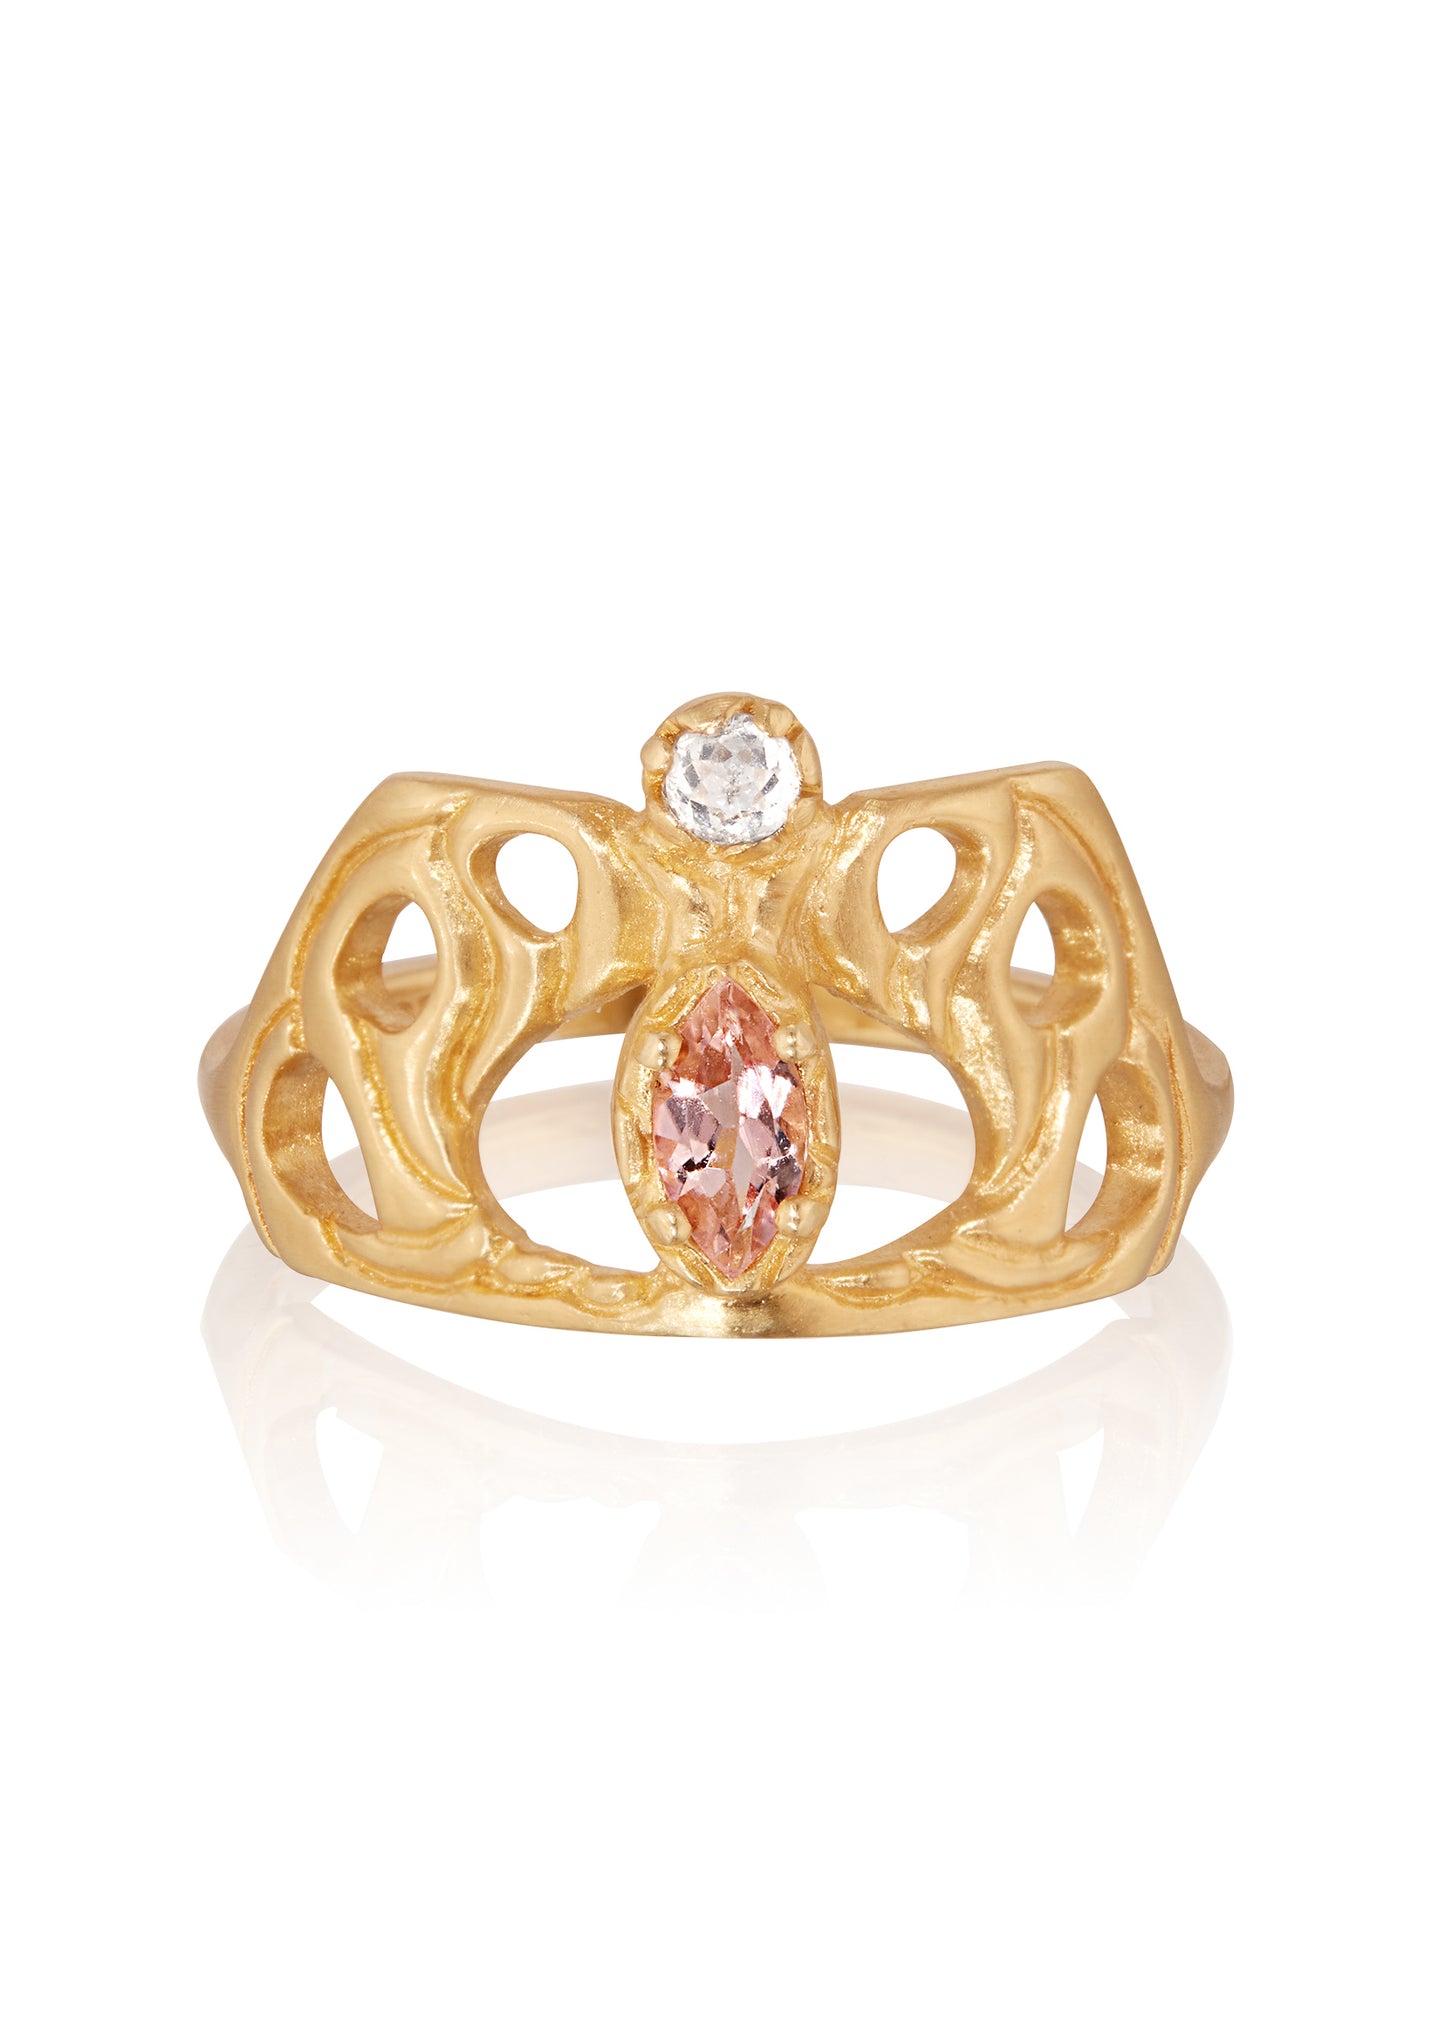 Framed by an intricate open-work pattern, the Anthea ring imagines the Greek goddess rendered in a window of stained glass, cradled by serpentine mullions of gleaming gold. A stunning tourmaline stone and rose cut diamond create a sensuous silhouette on this ring that bears her name. 